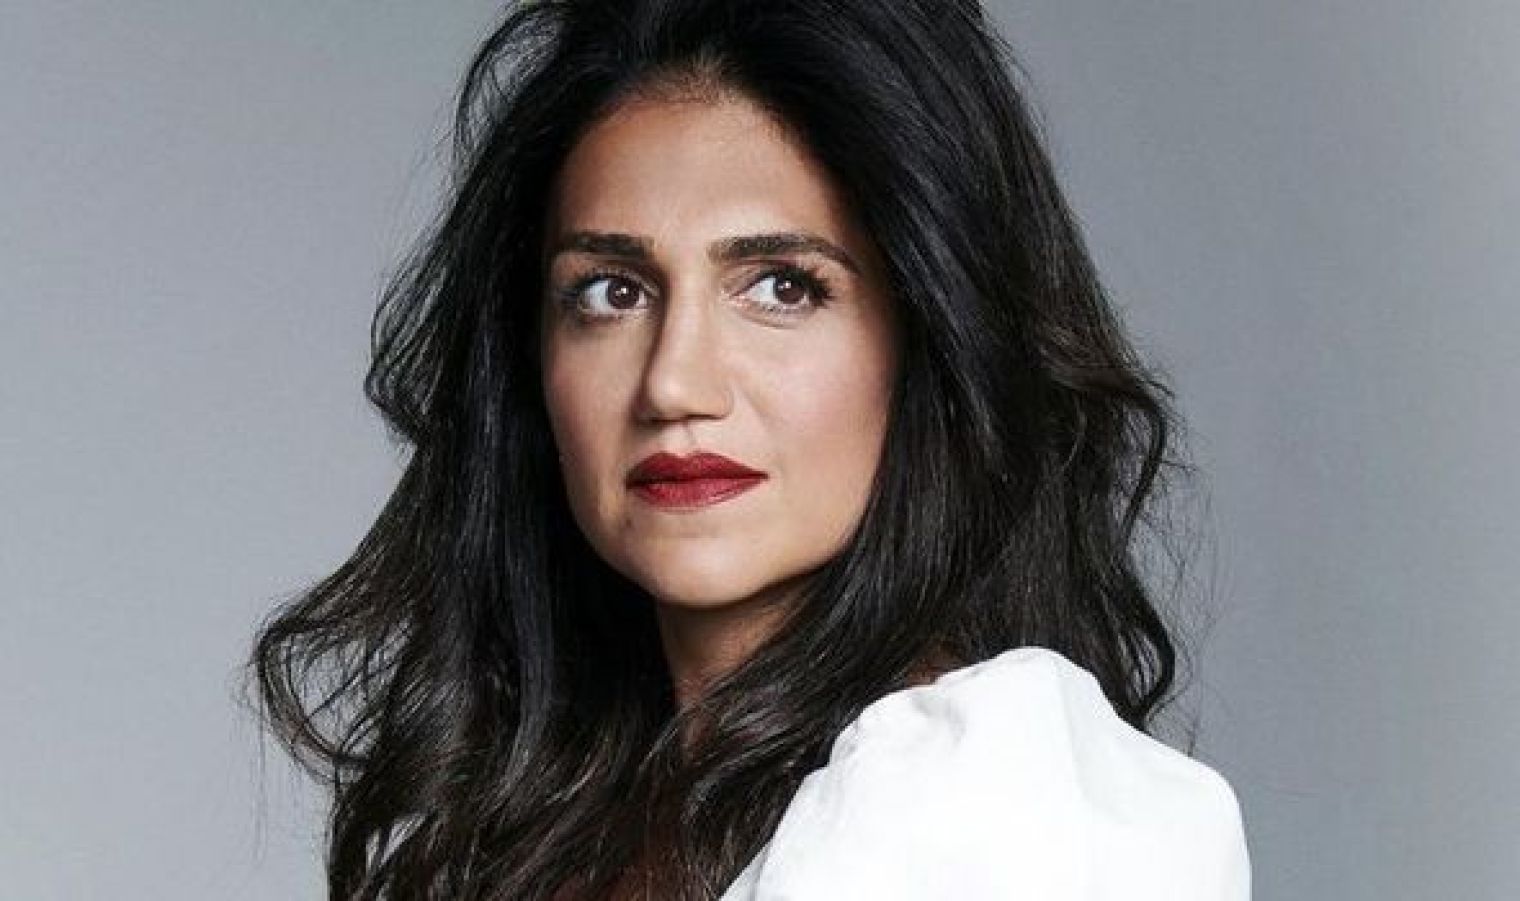 Leila Farzad to appear in new HBO/Sky Atlantic thriller Landscapers which premieres tonight